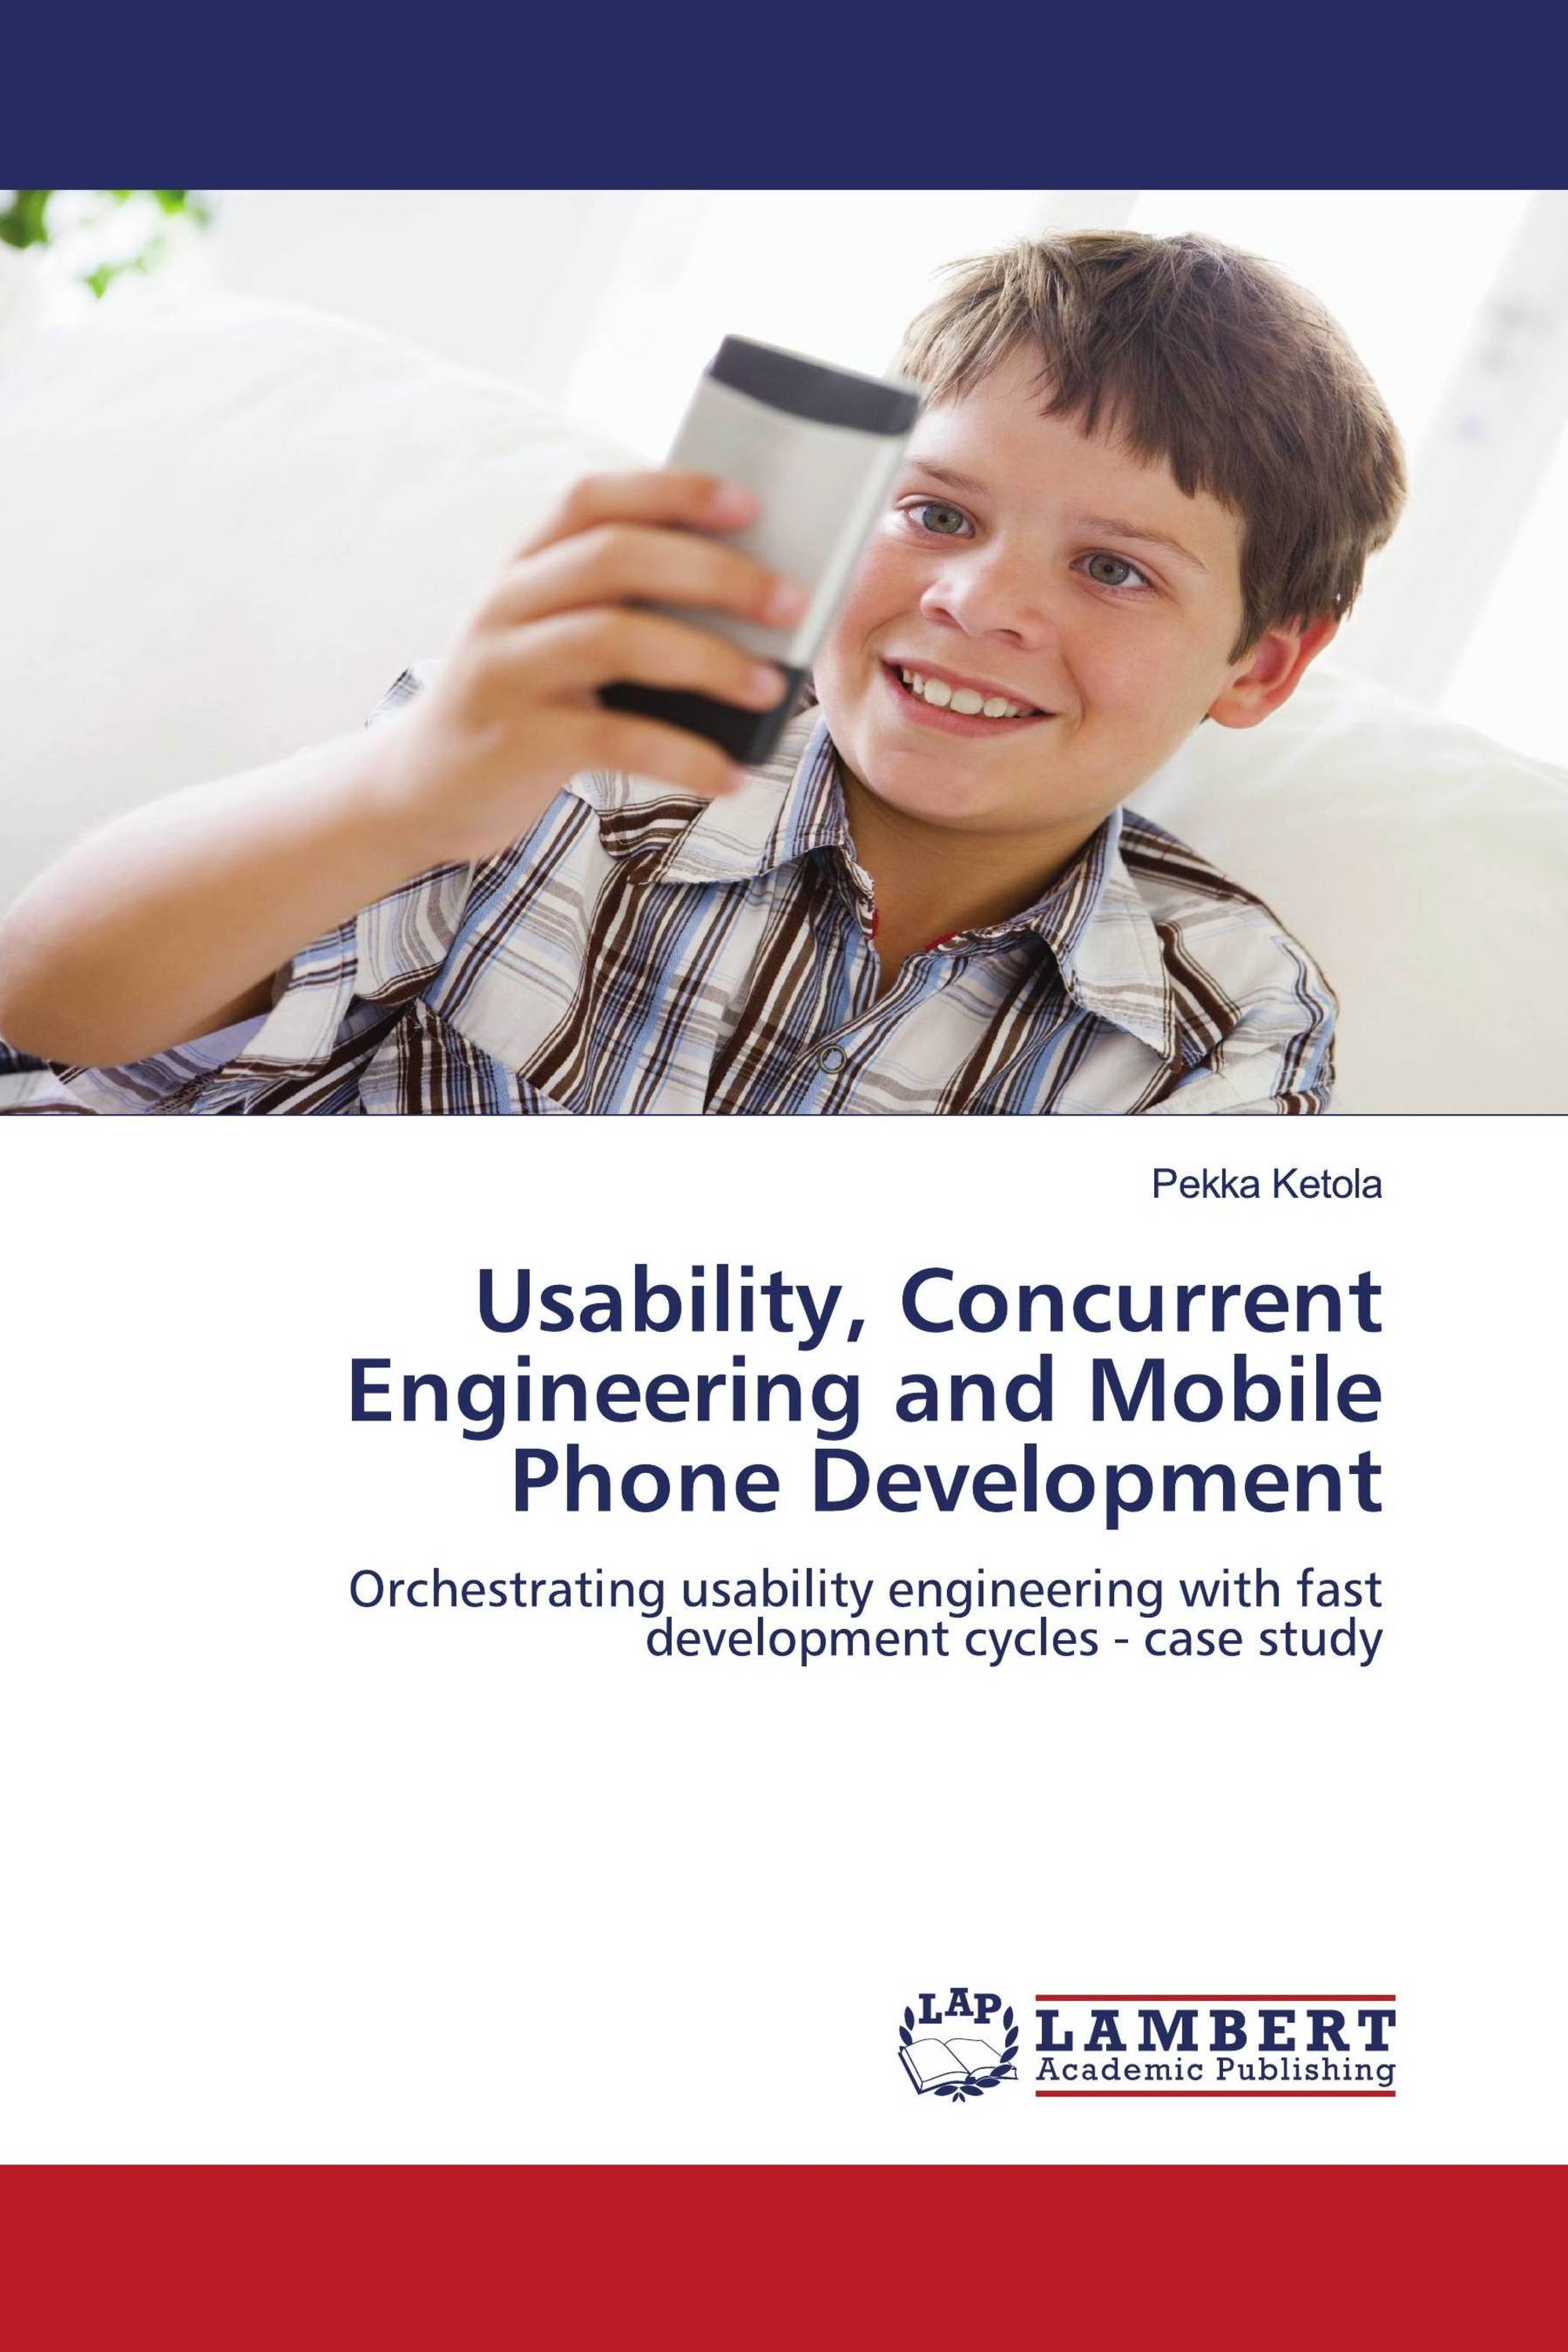 Usability, Concurrent Engineering and Mobile Phone Development